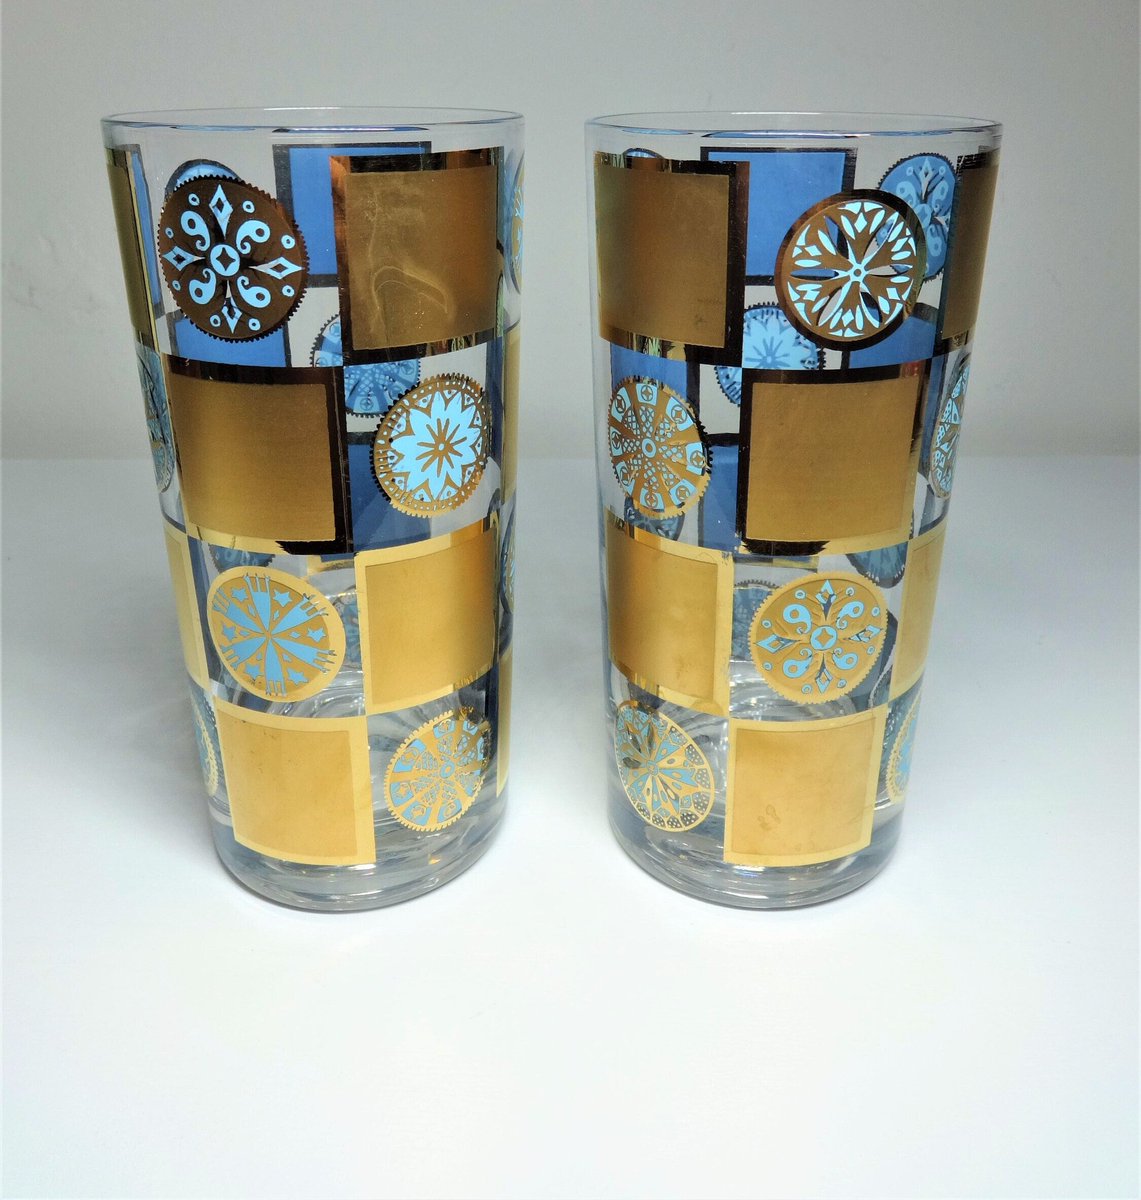 Excited to share the latest addition to my #etsy shop: Culver Turquoise and Gold High Ball Glasses etsy.me/3Q0BL5B #clear #gold #no #glass #culver #highballglasses #drinkingglasses #barware #vintageglasses